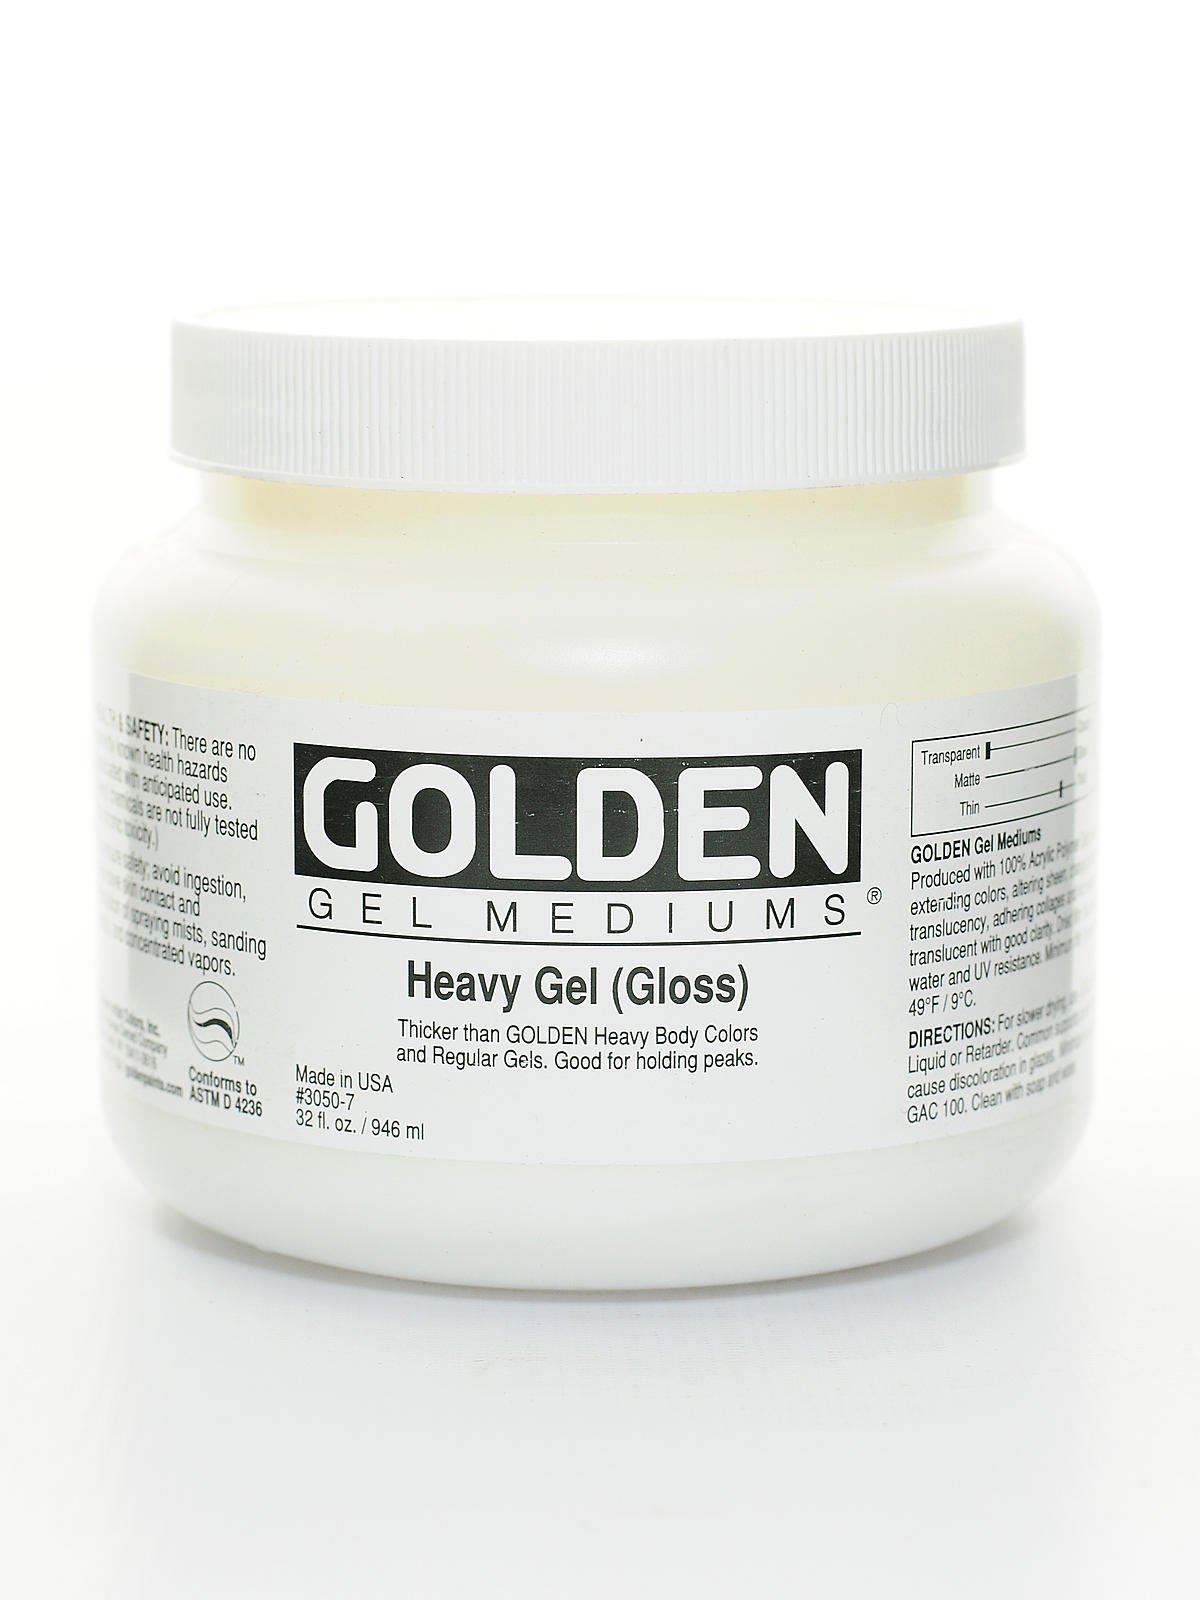 GOLDEN Gel Medium and Fluid Acrylics Featured in Spring Promotion,  Highlighting Product Versatility, Endless Possibilities